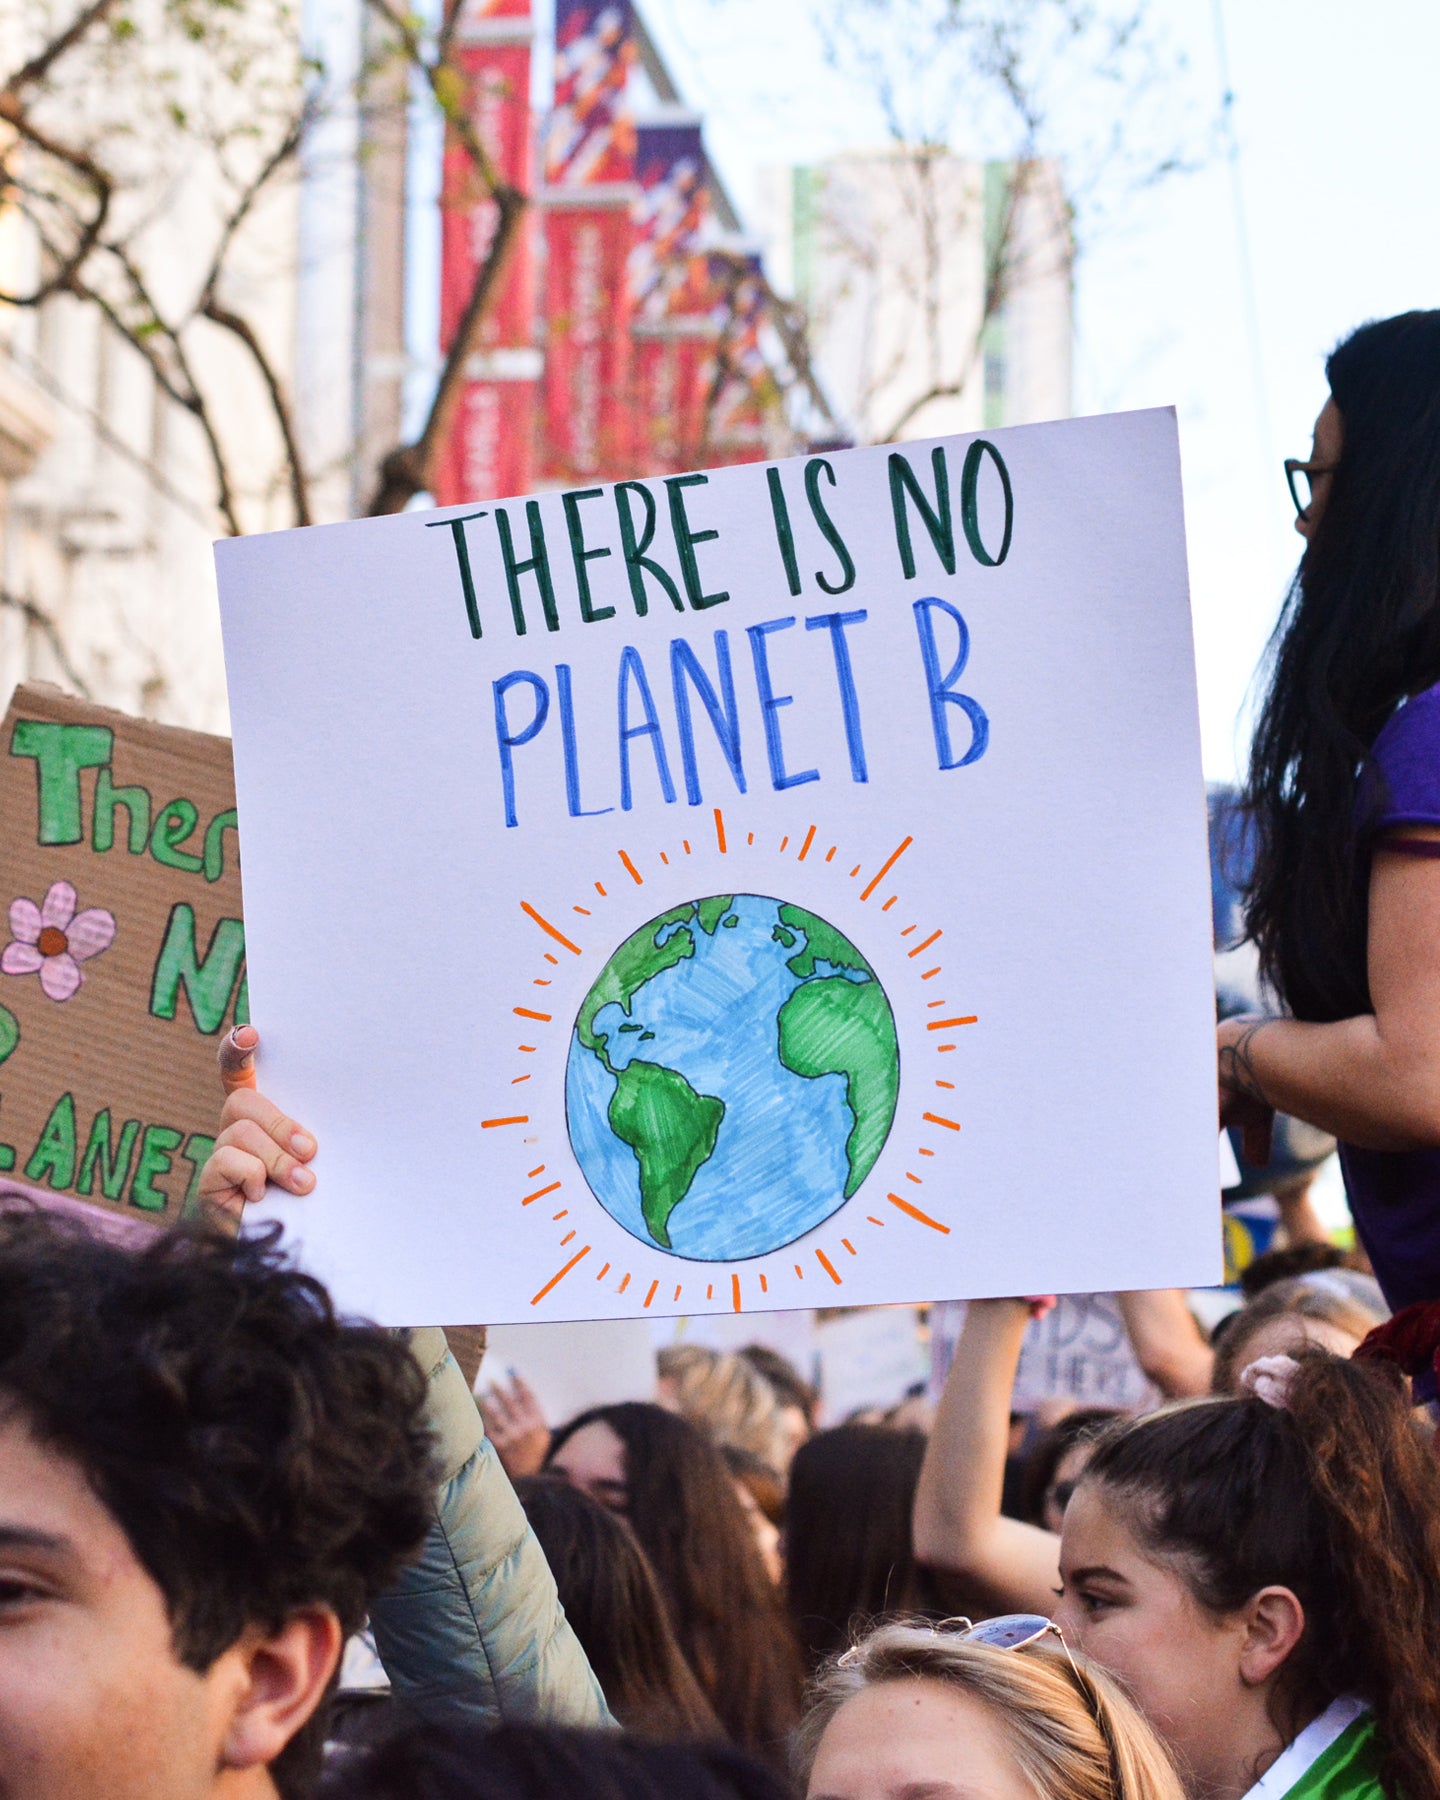 A sign is held up at an environmental protest. The sign reads "There is no Planet B" and has a drawing of the earth on it.